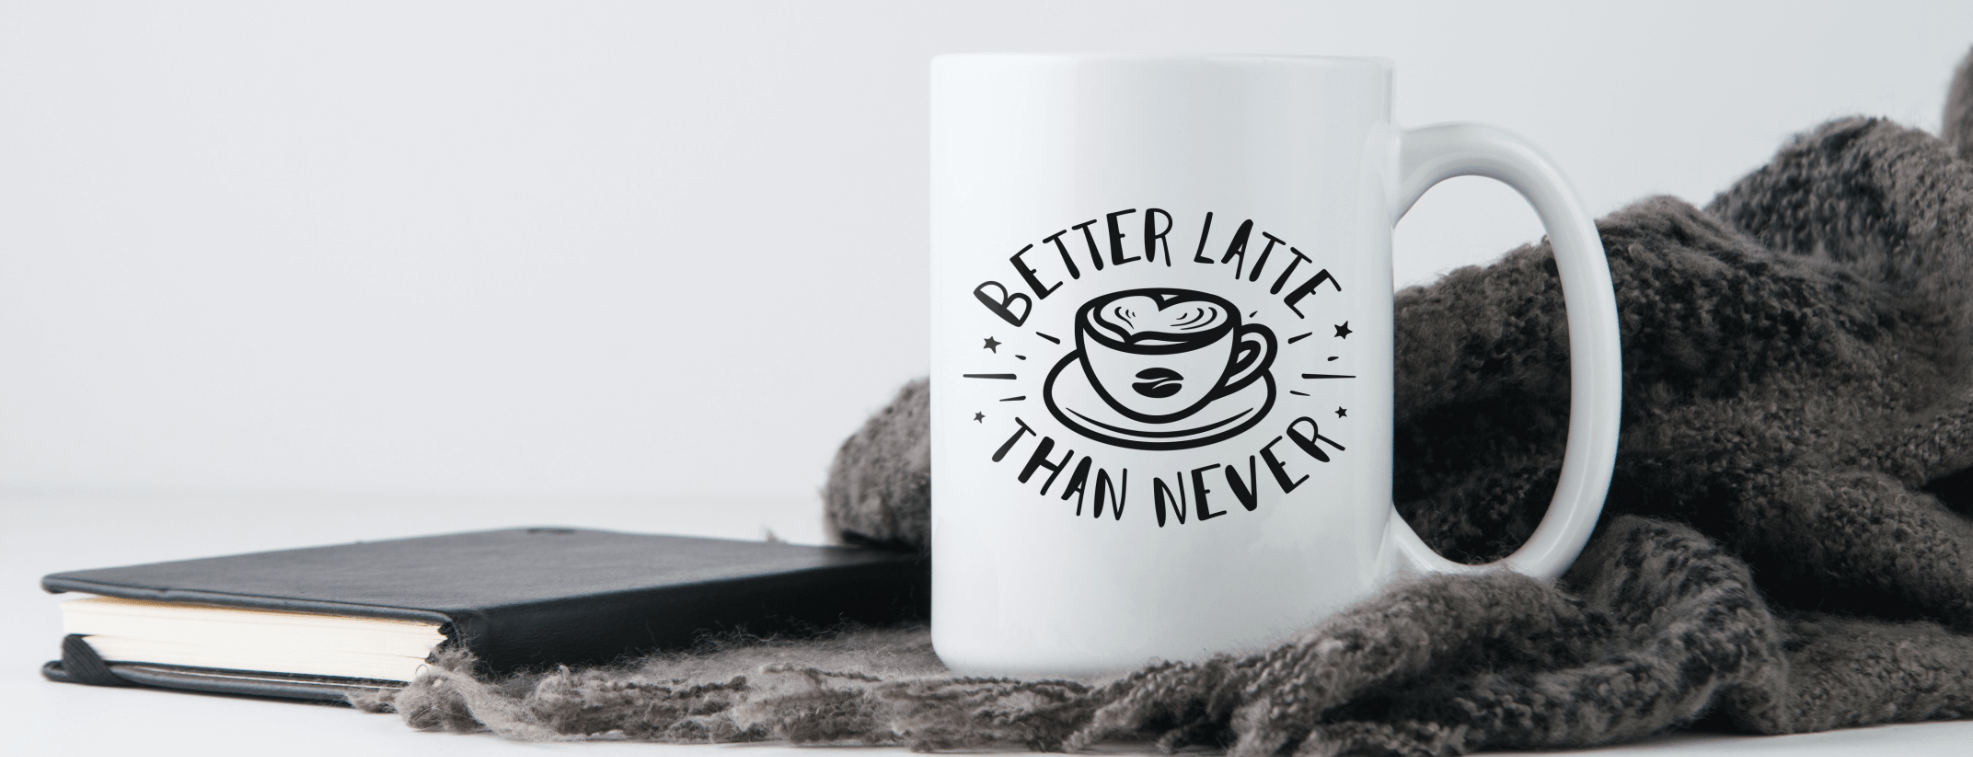 Coffee mug for coffee lovers with Better Latte Then Never caption on it